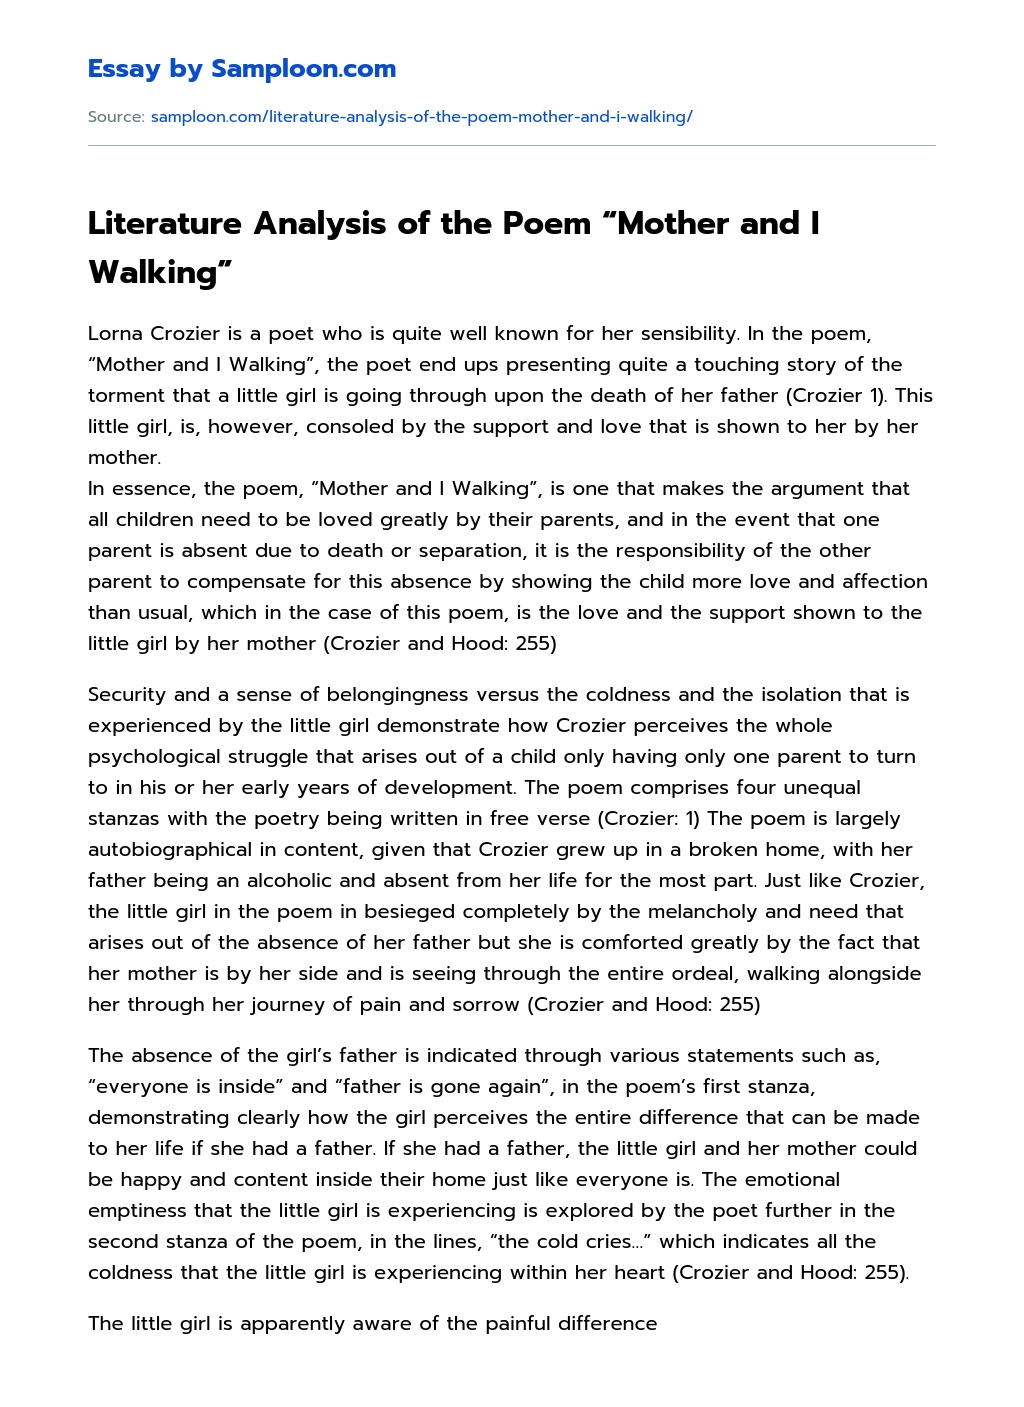 Literature Analysis of the Poem “Mother and I Walking” Character Analysis essay